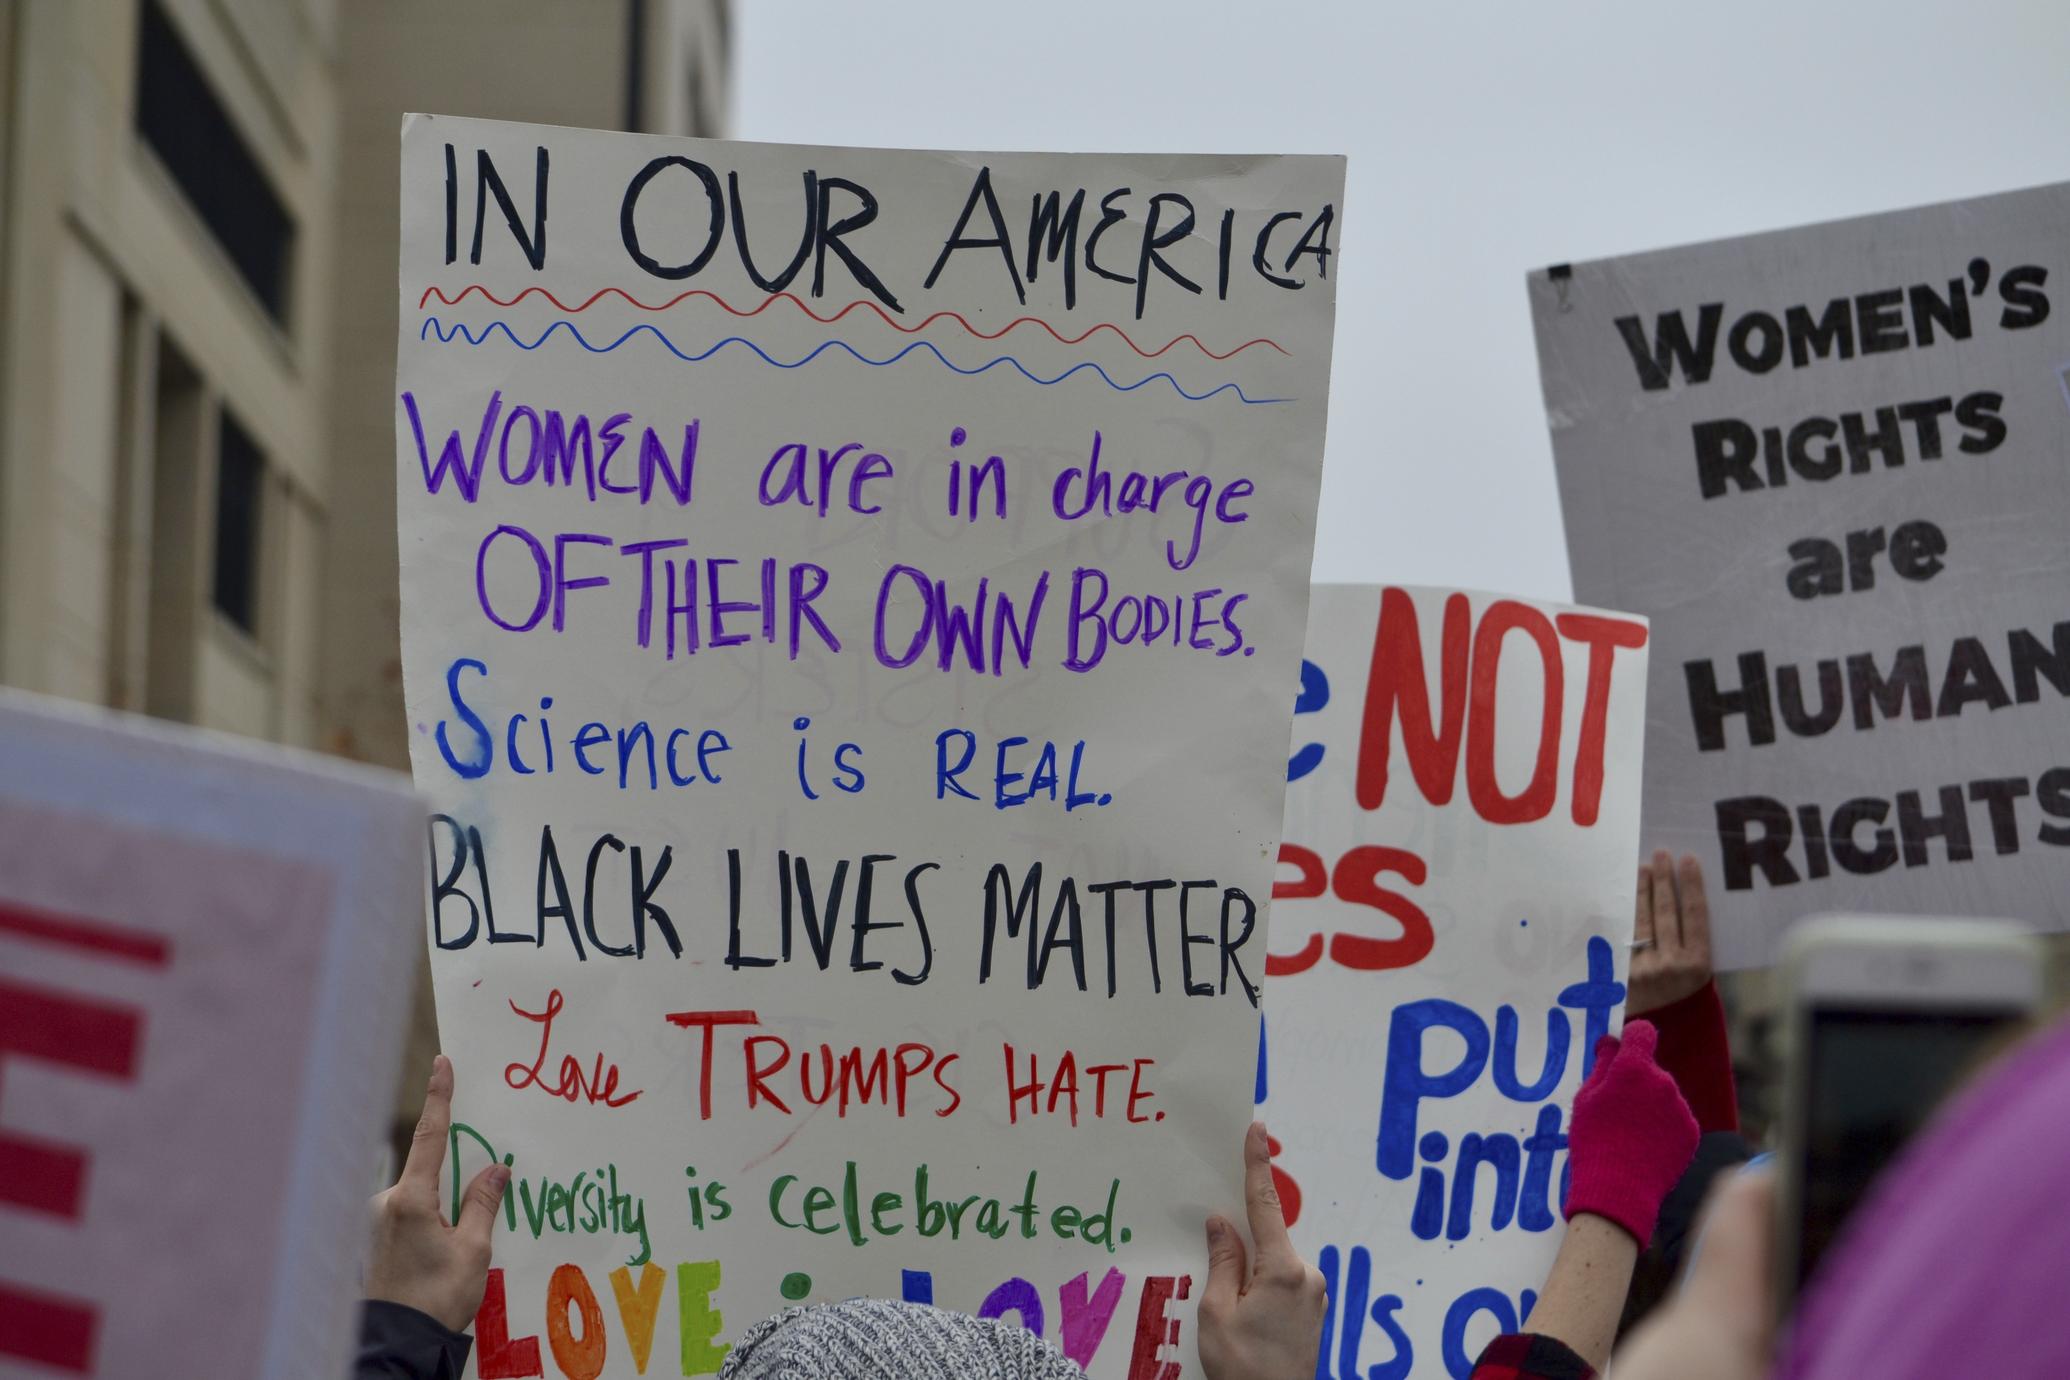 In Our America, Women Are in Charge of Their Own Bodies, Science is Real, Black Lives Matter, Love Trumps Hate, Diversity is Celebrated. Love is Love